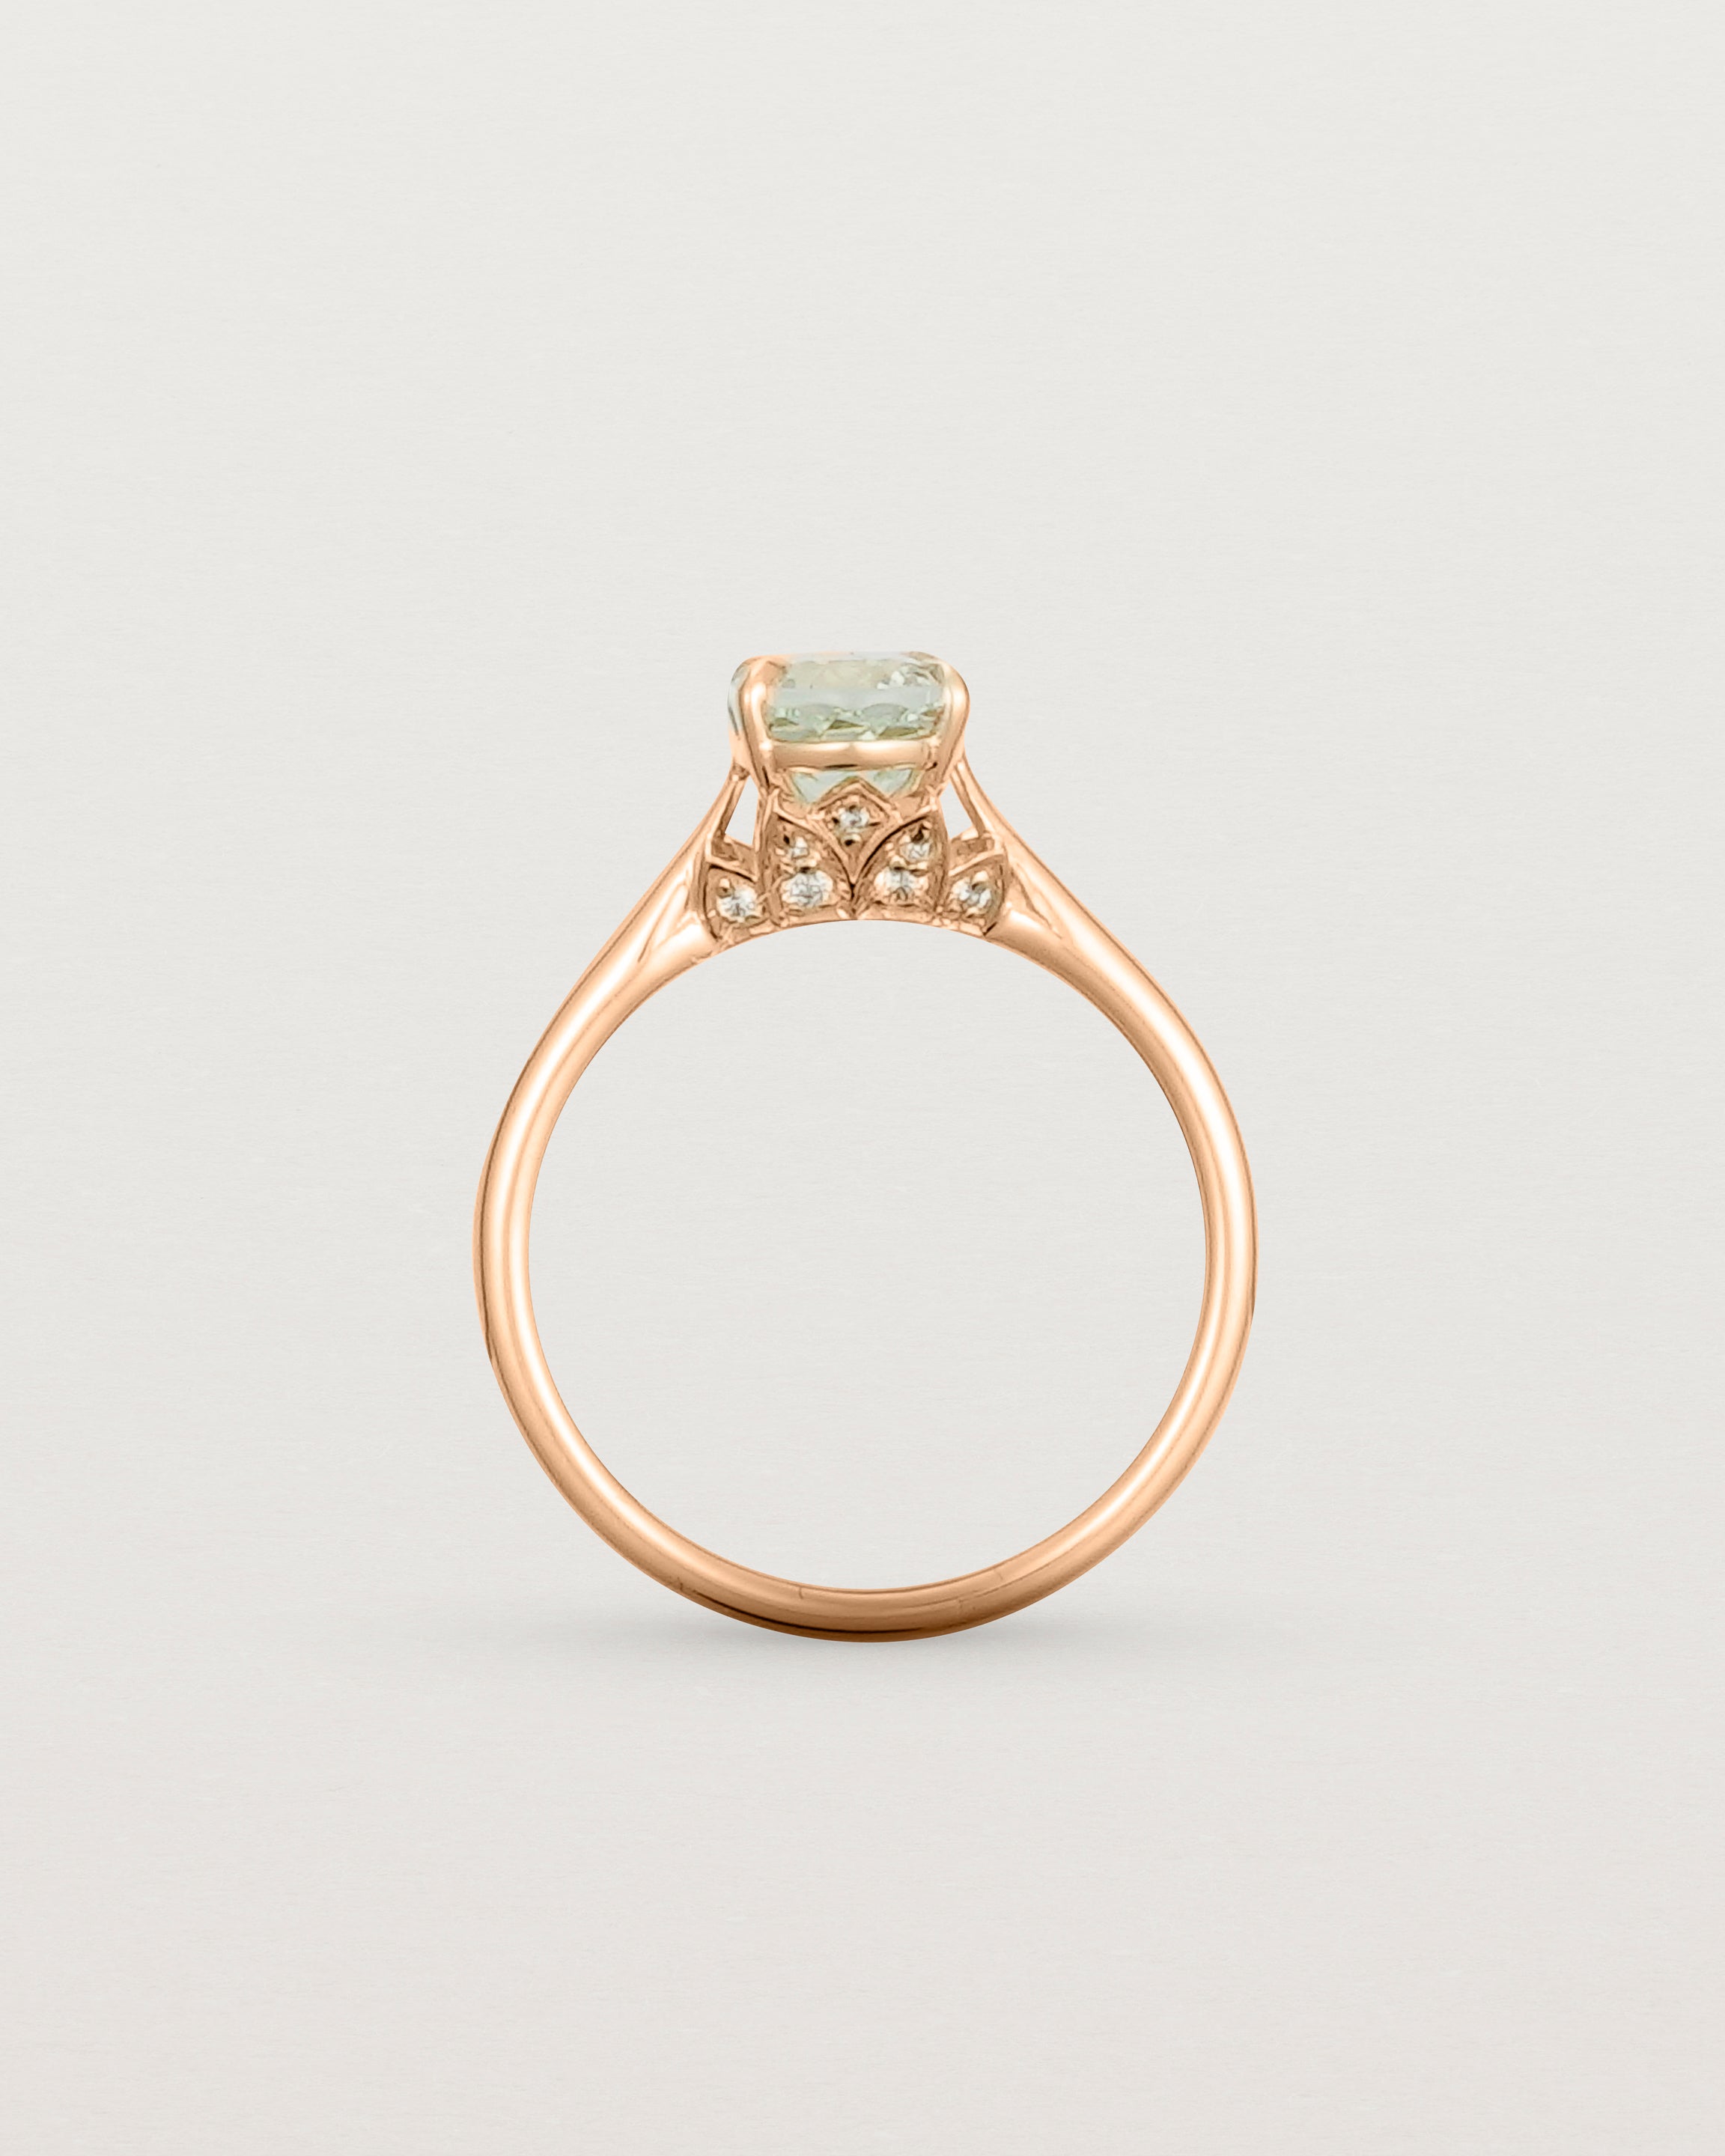 Standing view of the Kalina Oval Solitaire | Green Amethyst | Rose Gold.